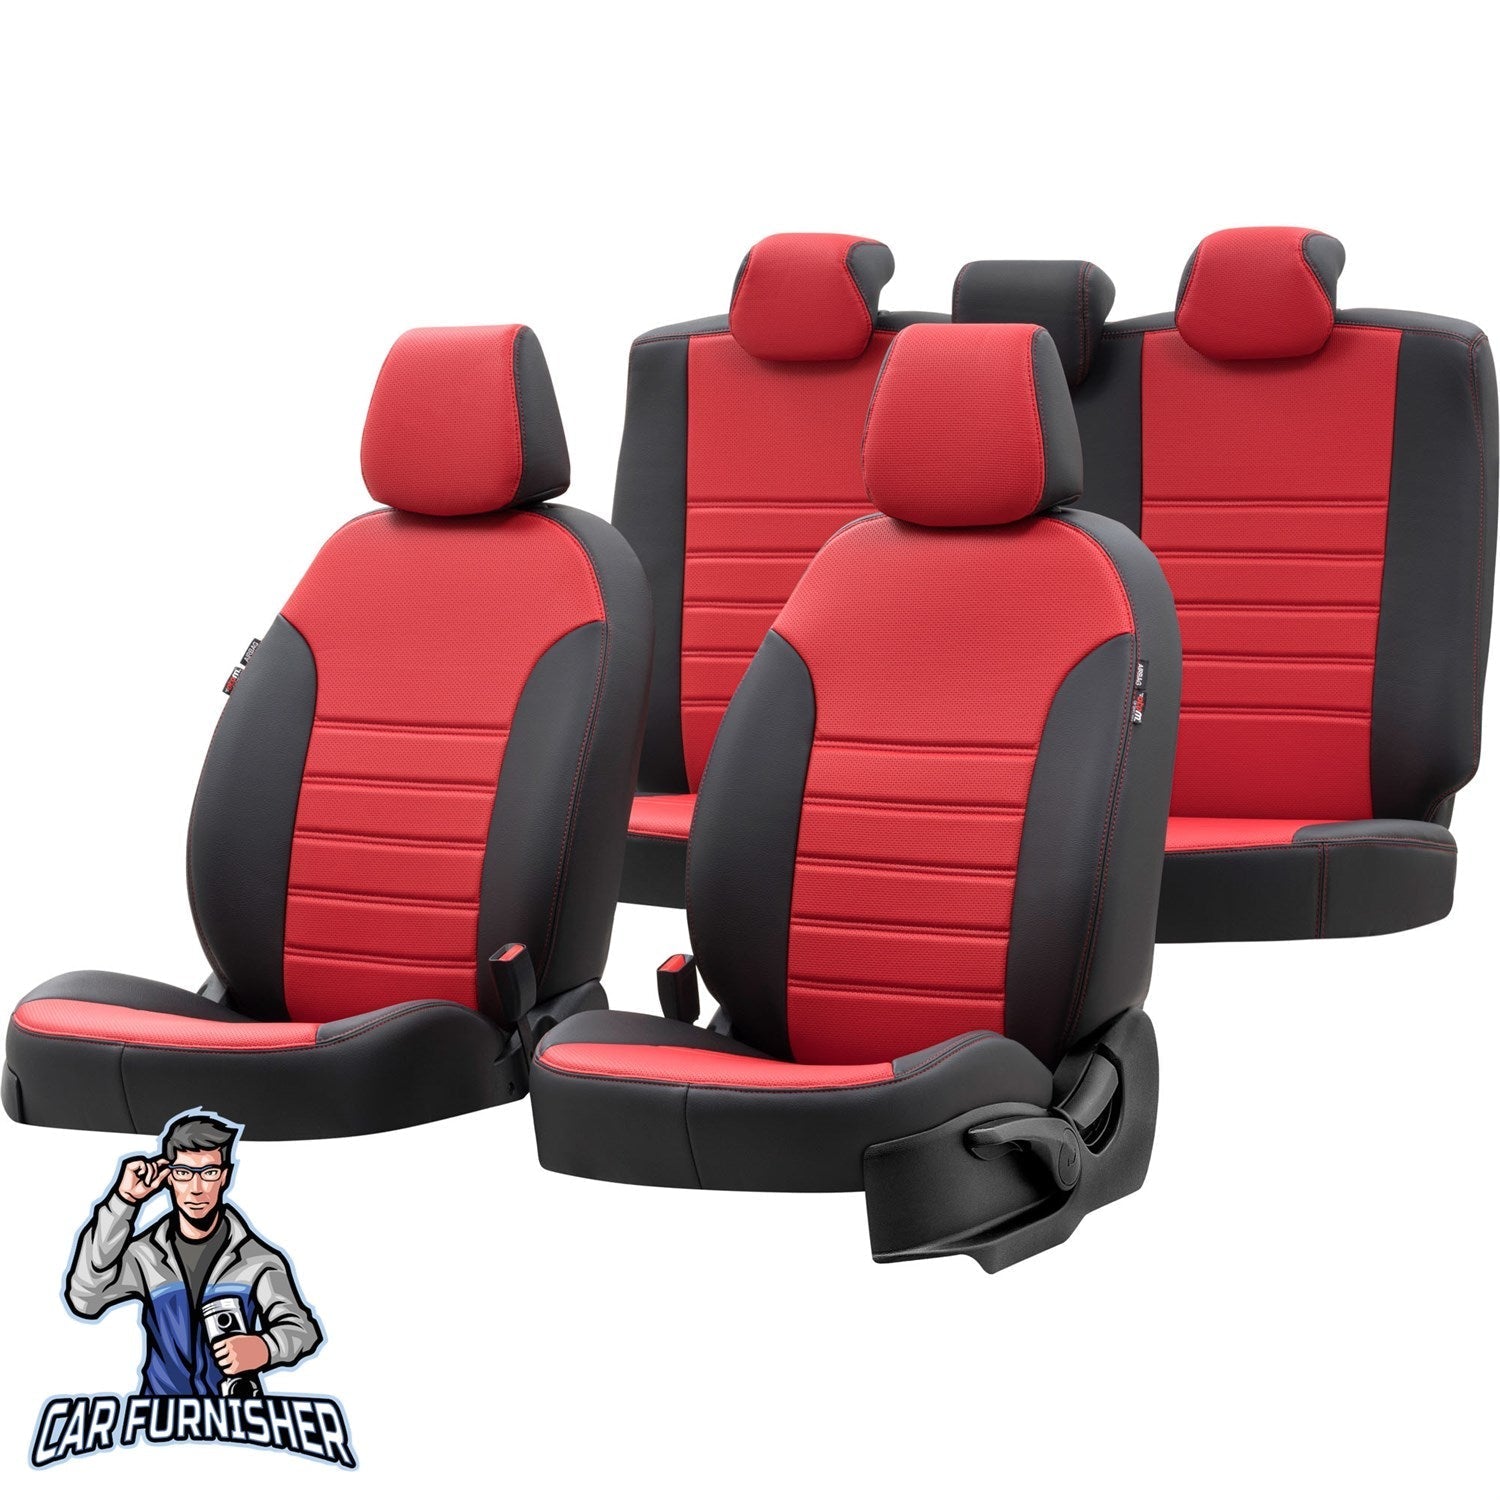 Geely Emgrand Seat Covers New York Leather Design Red Leather